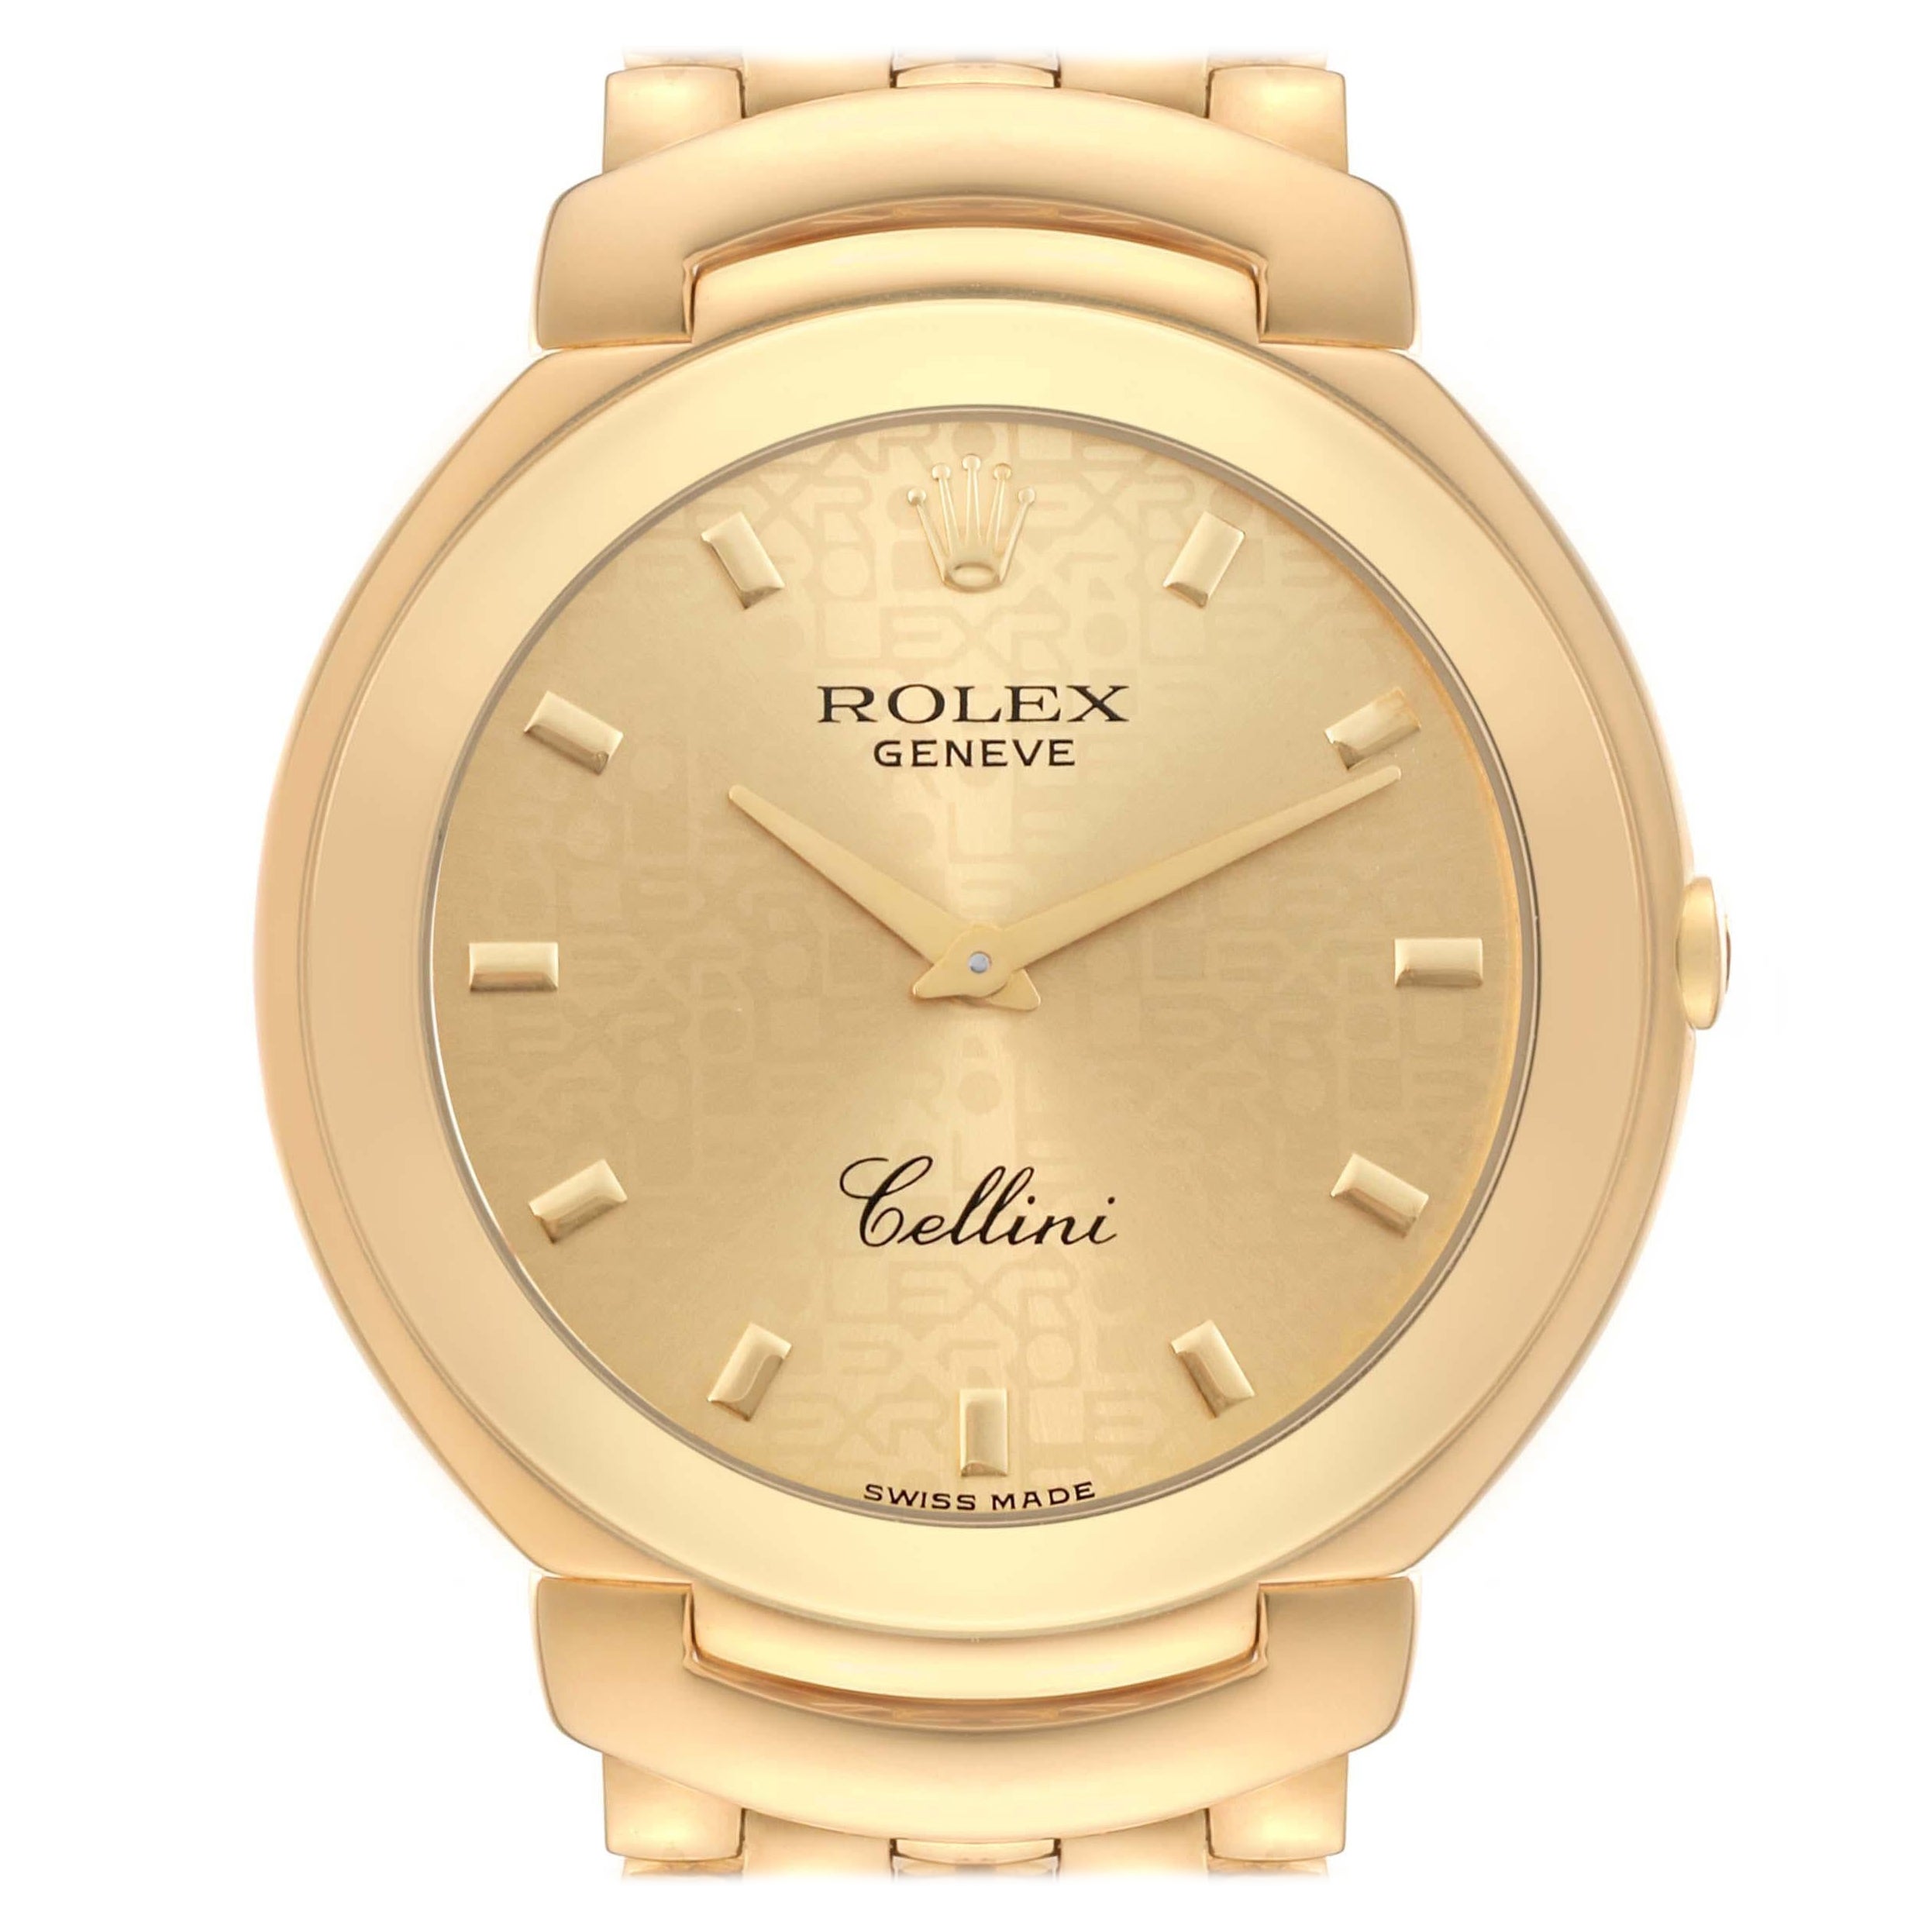 Rolex Cellini Yellow Gold Champagne Anniversary Dial Mens Watch 6623 Box Papers For Sale